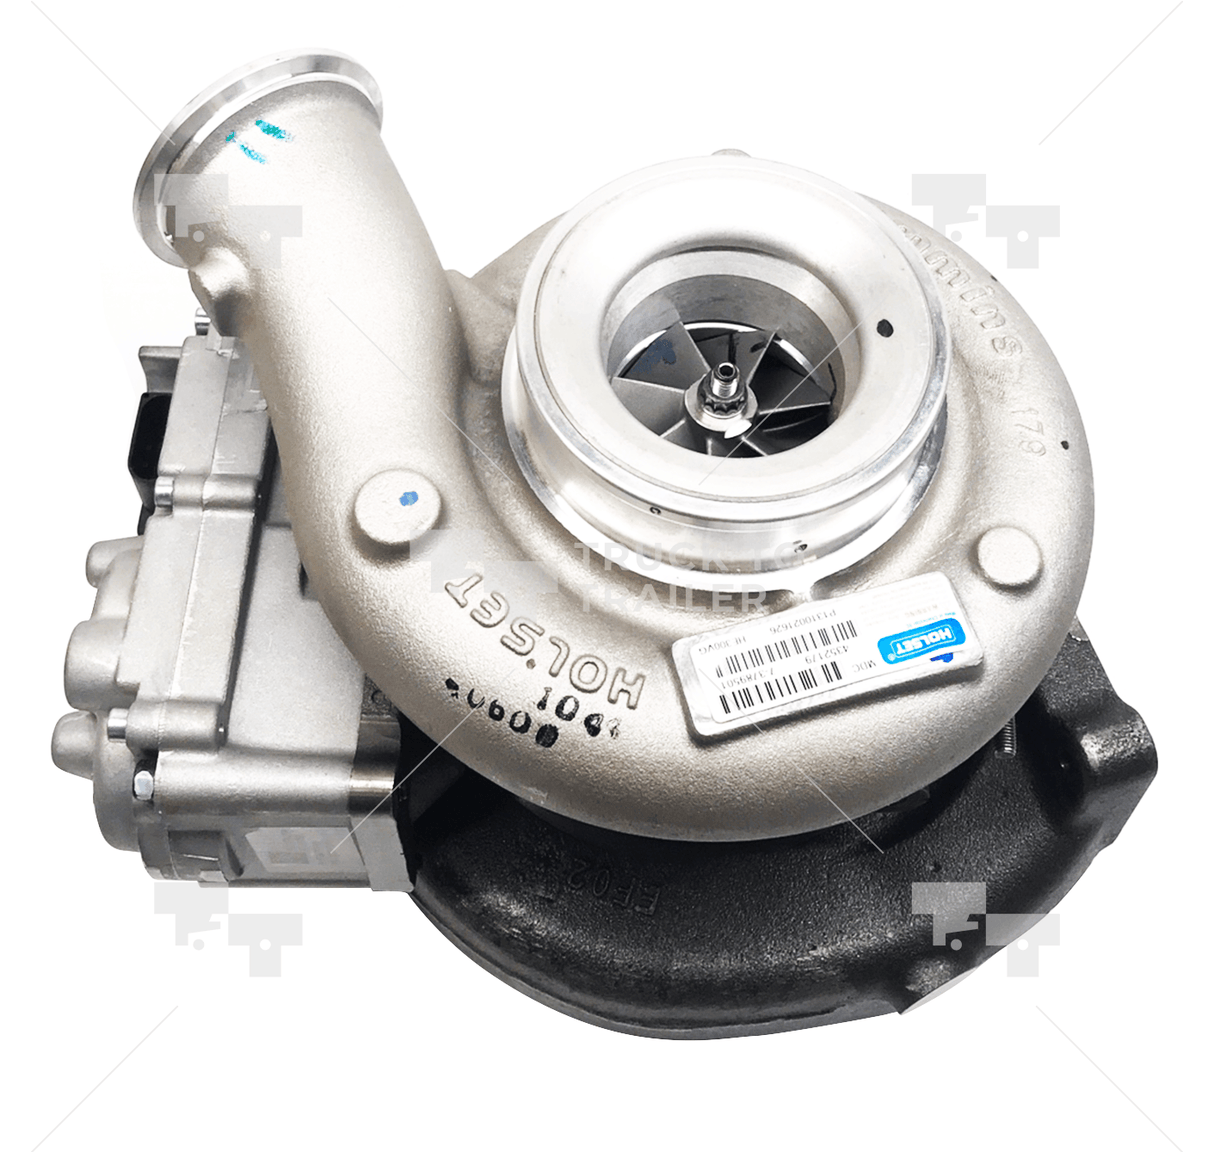 4352179Nx Oem Cummins Turbocharger Kit For Cummins 6.7 No Core Charge - Truck To Trailer